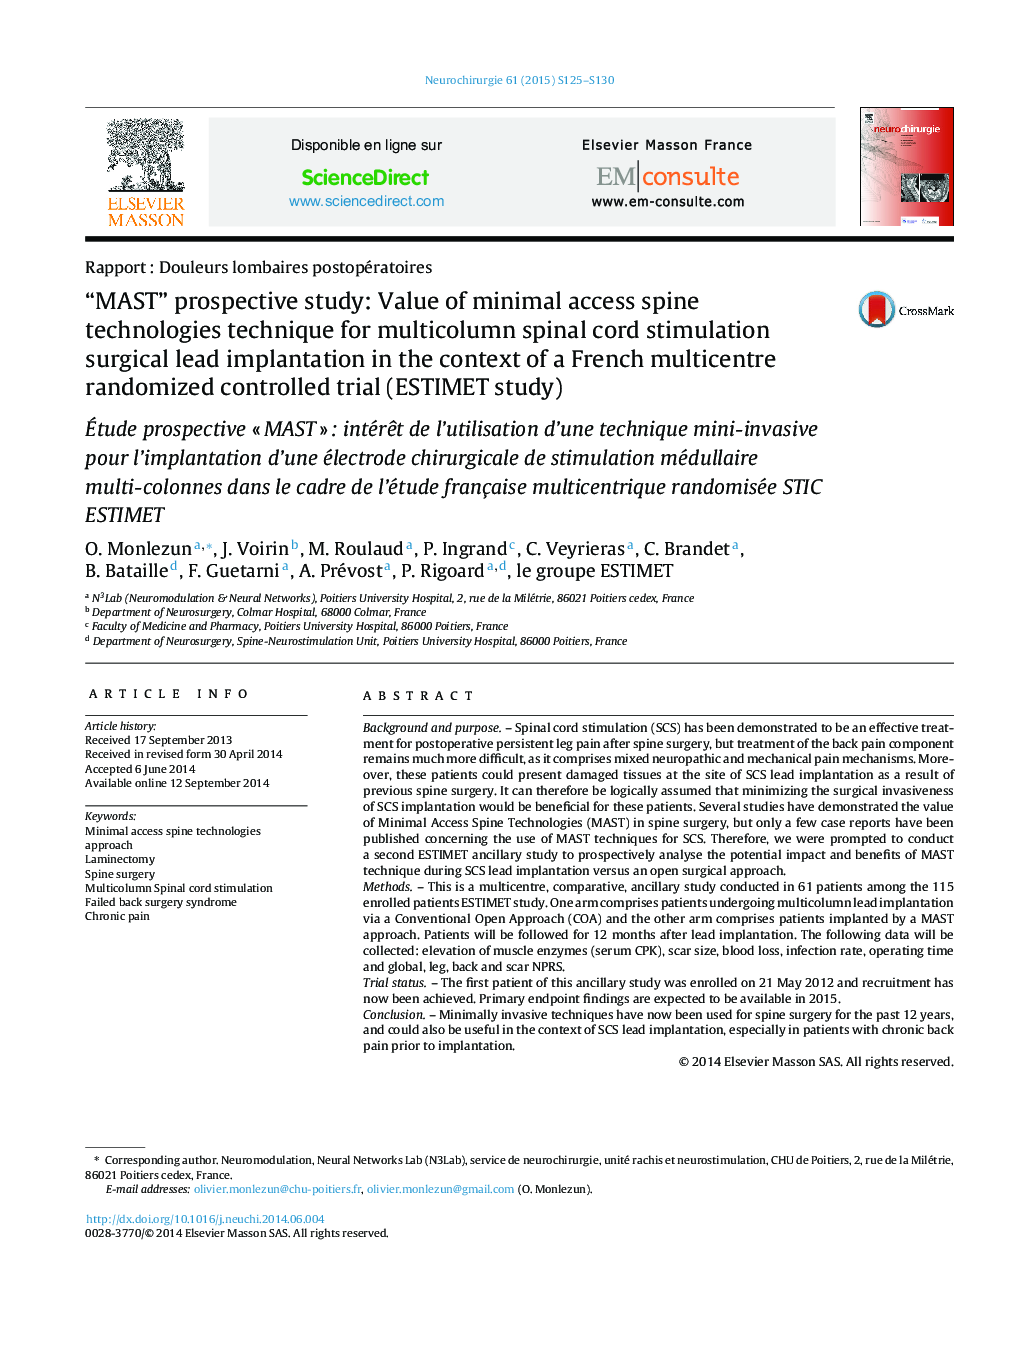 “MAST” prospective study: Value of minimal access spine technologies technique for multicolumn spinal cord stimulation surgical lead implantation in the context of a French multicentre randomized controlled trial (ESTIMET study)